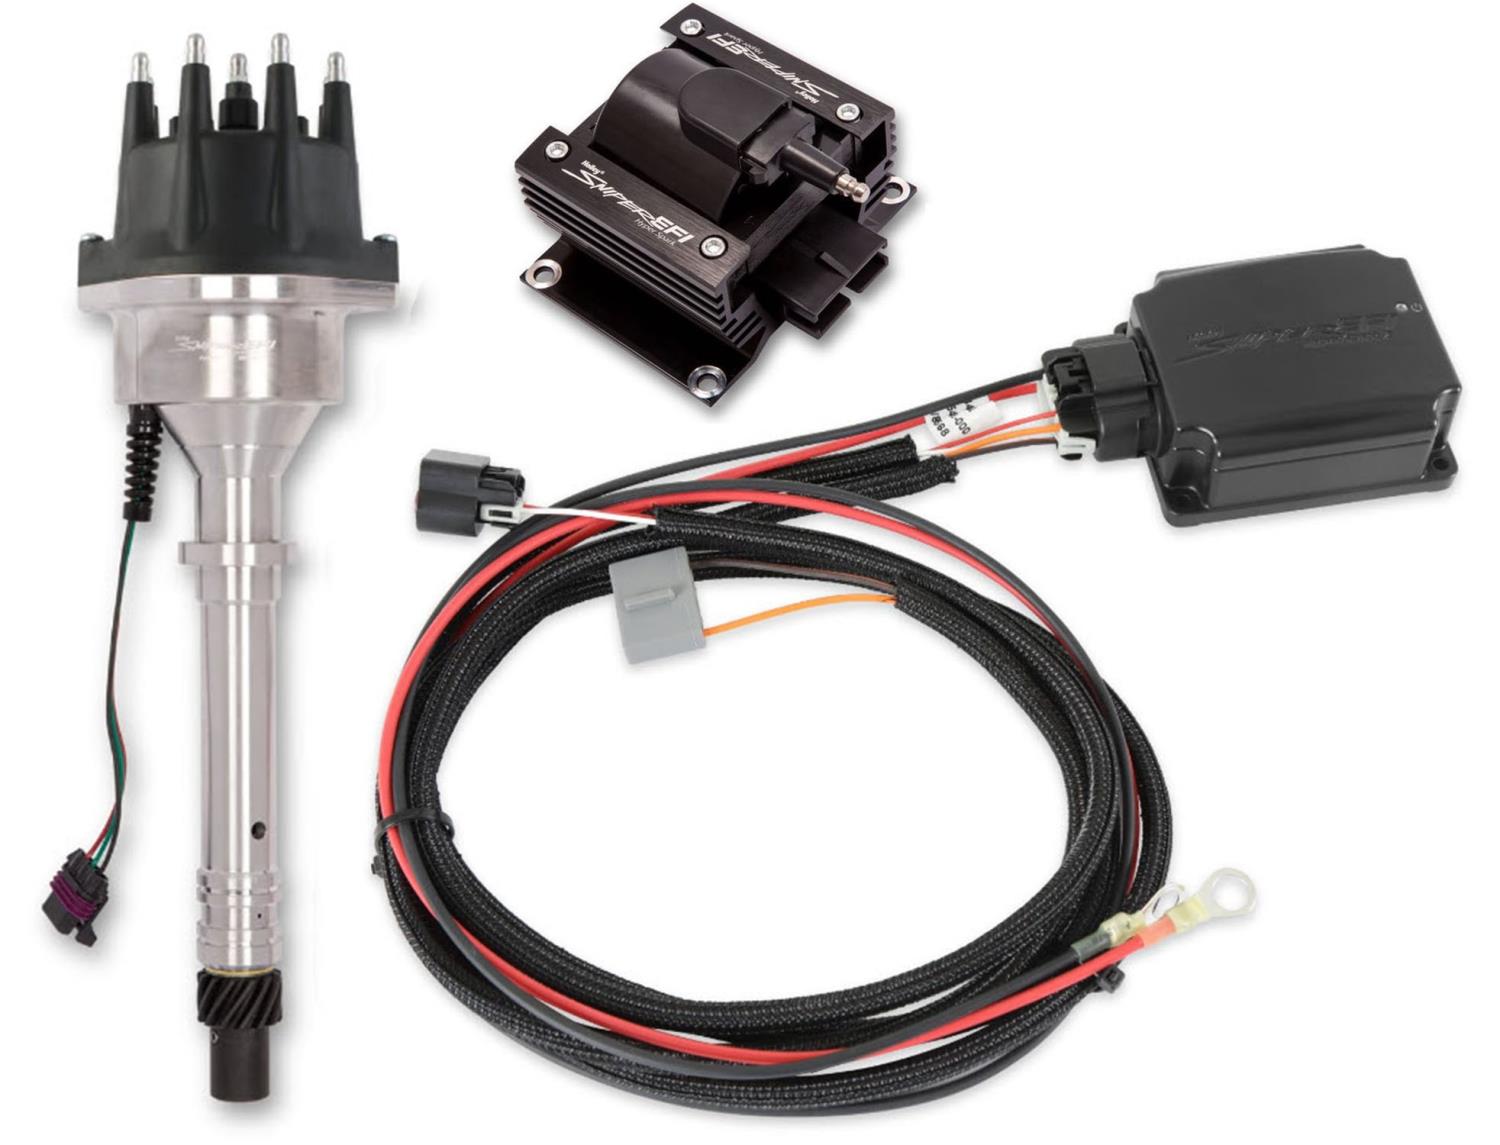 Sniper EFI HyperSpark Distributor Kit for 260-302 ci. Ford Small Block Engines (w/HyperSpark II Ignition Box)